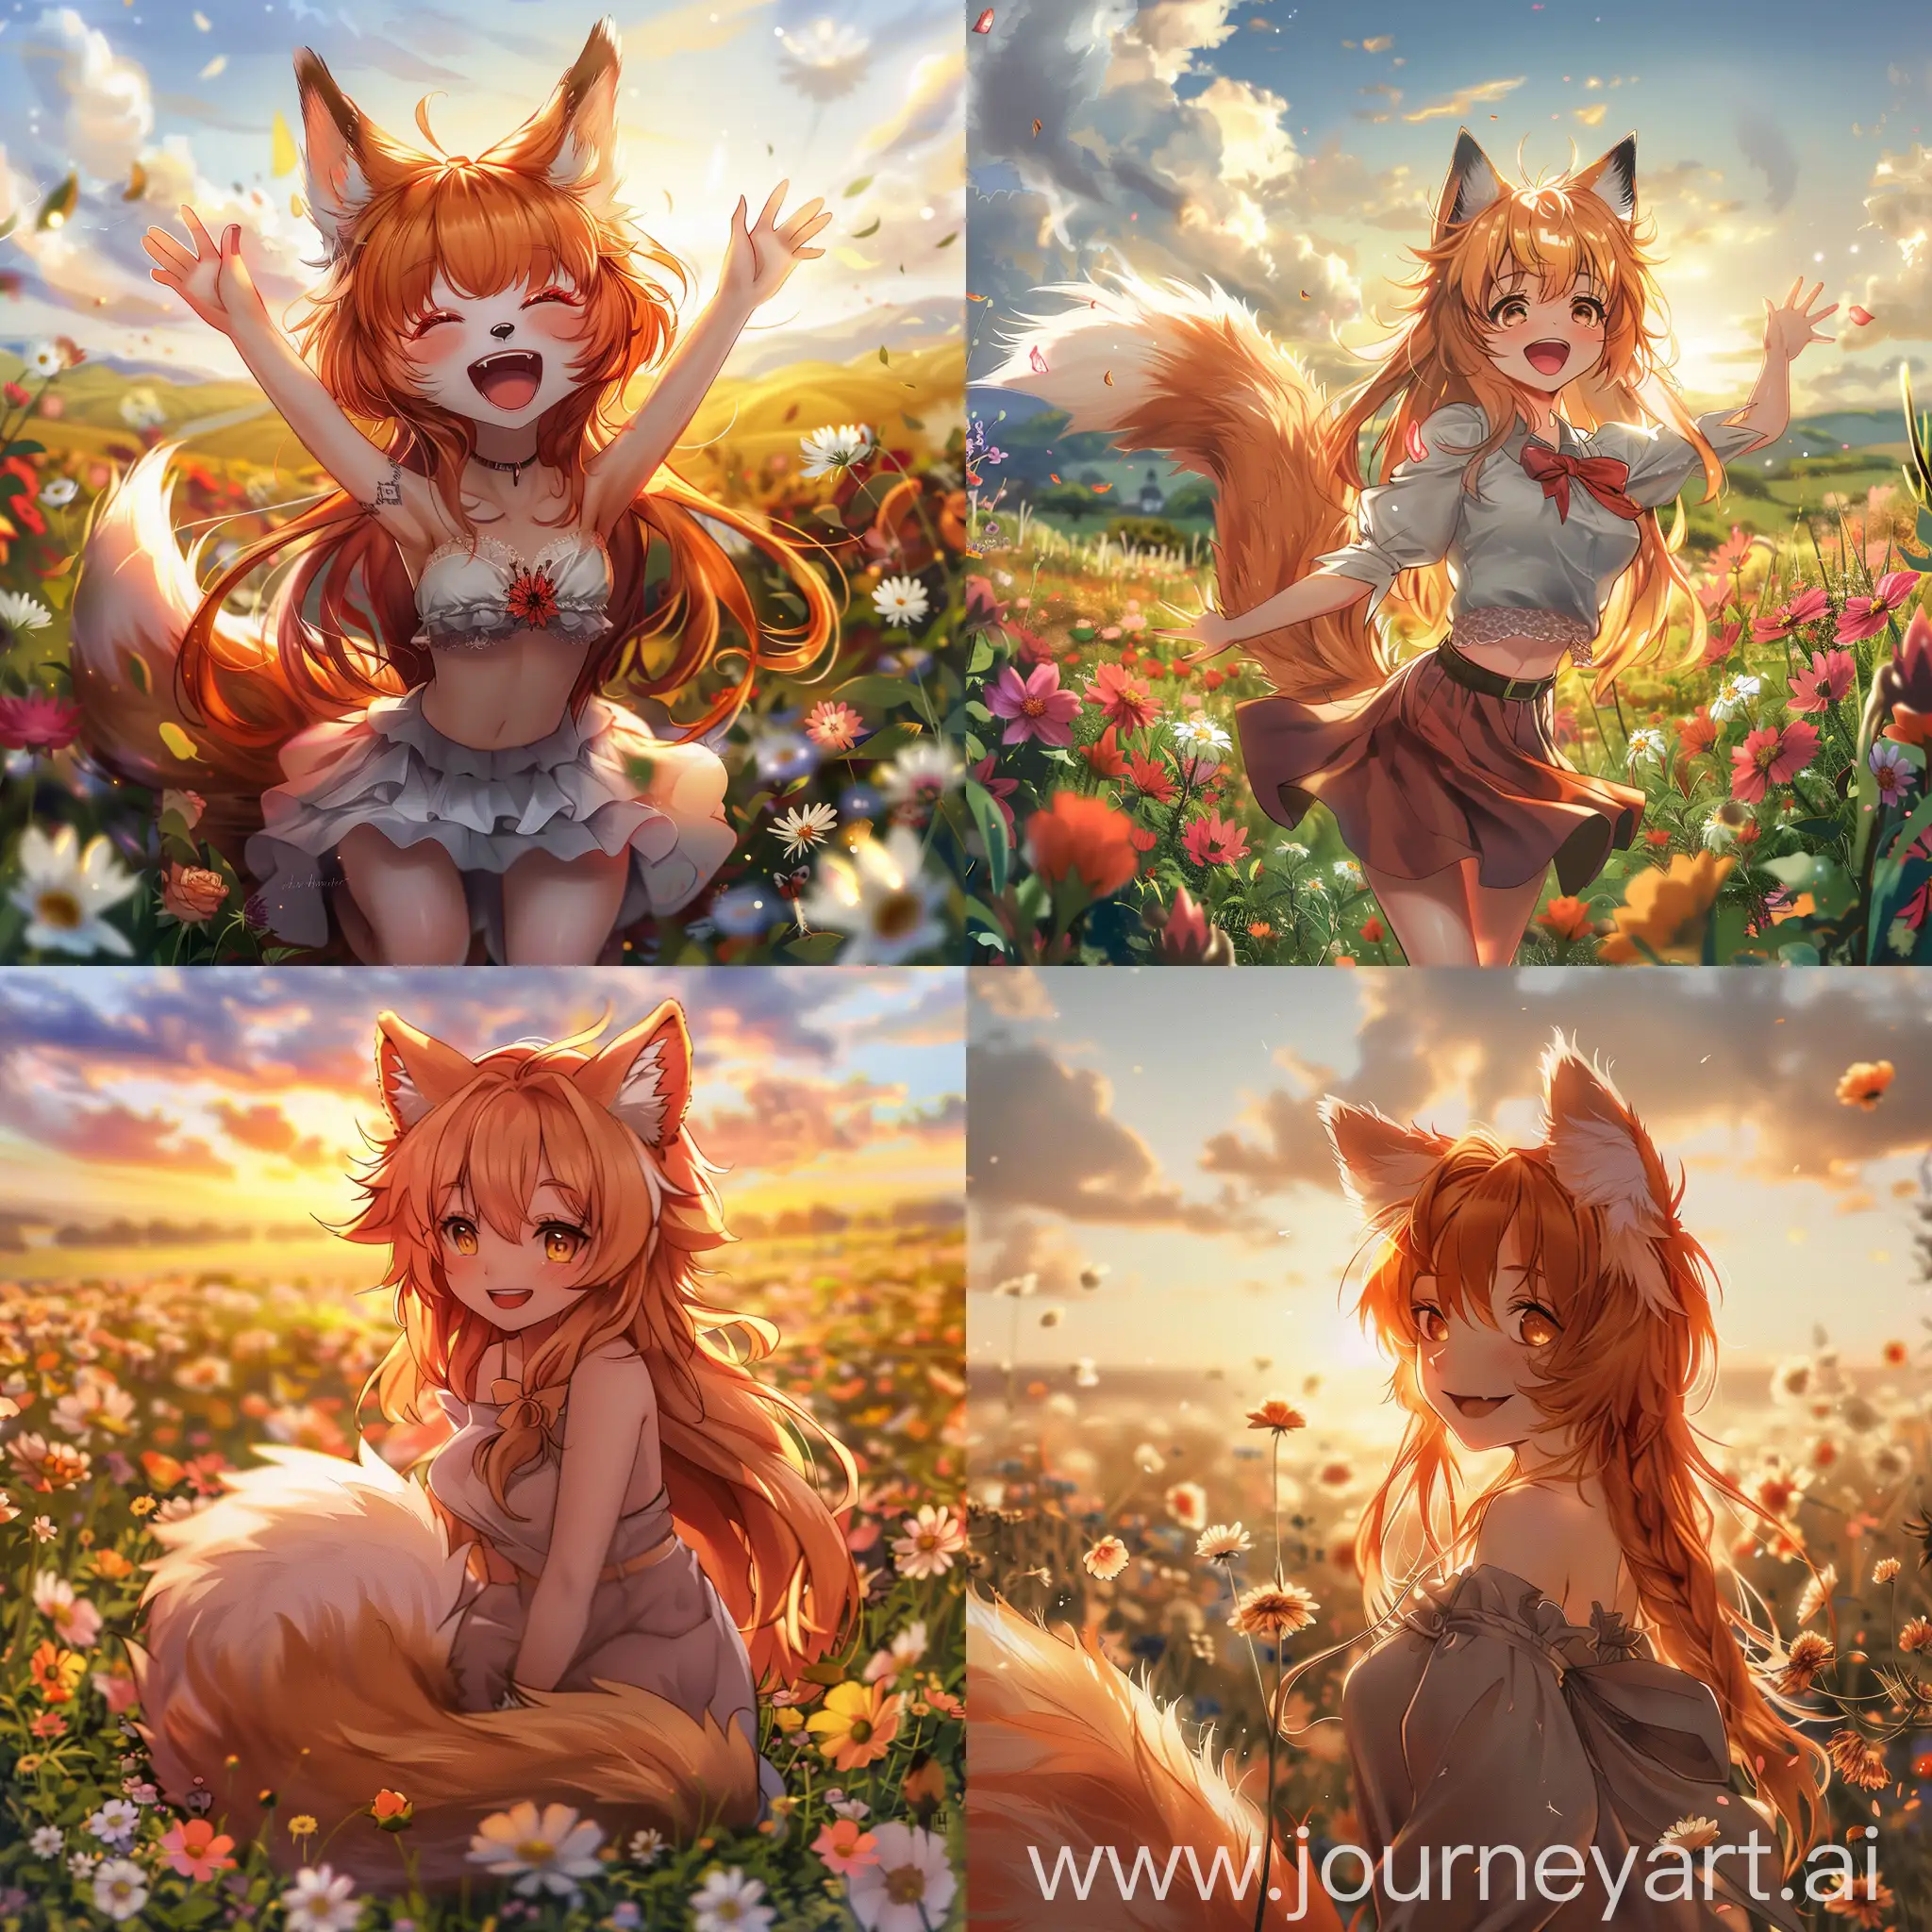 Anime-Style-Fox-Girl-with-Fluffy-Tail-in-a-Morning-Flower-Field